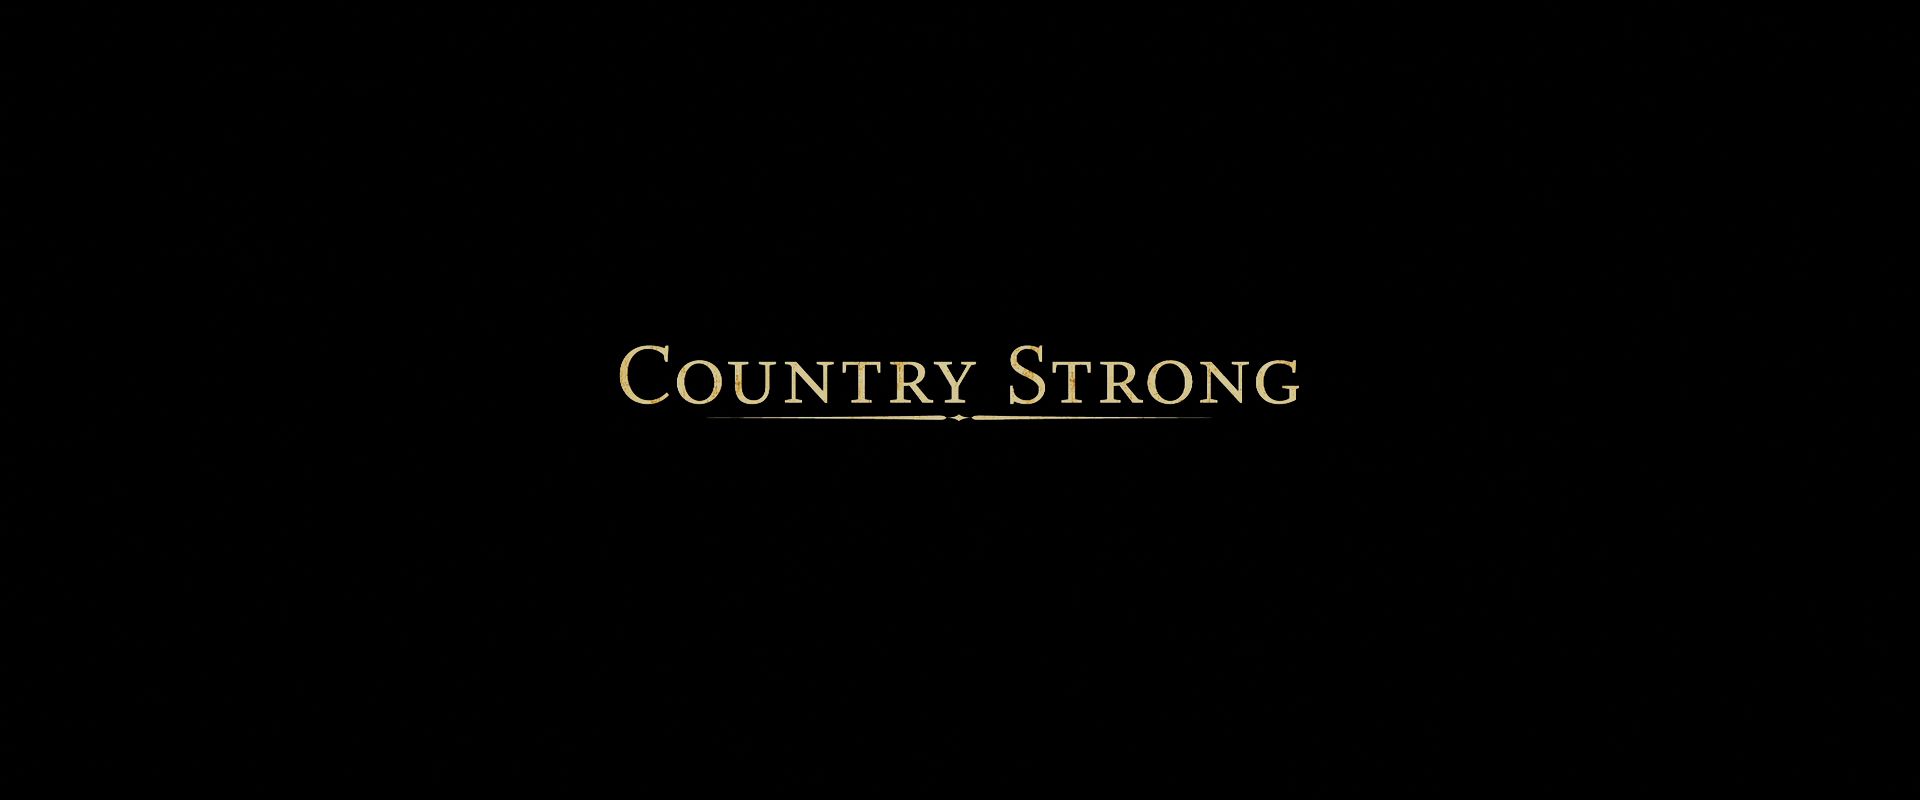 CountryStrong0001.jpg